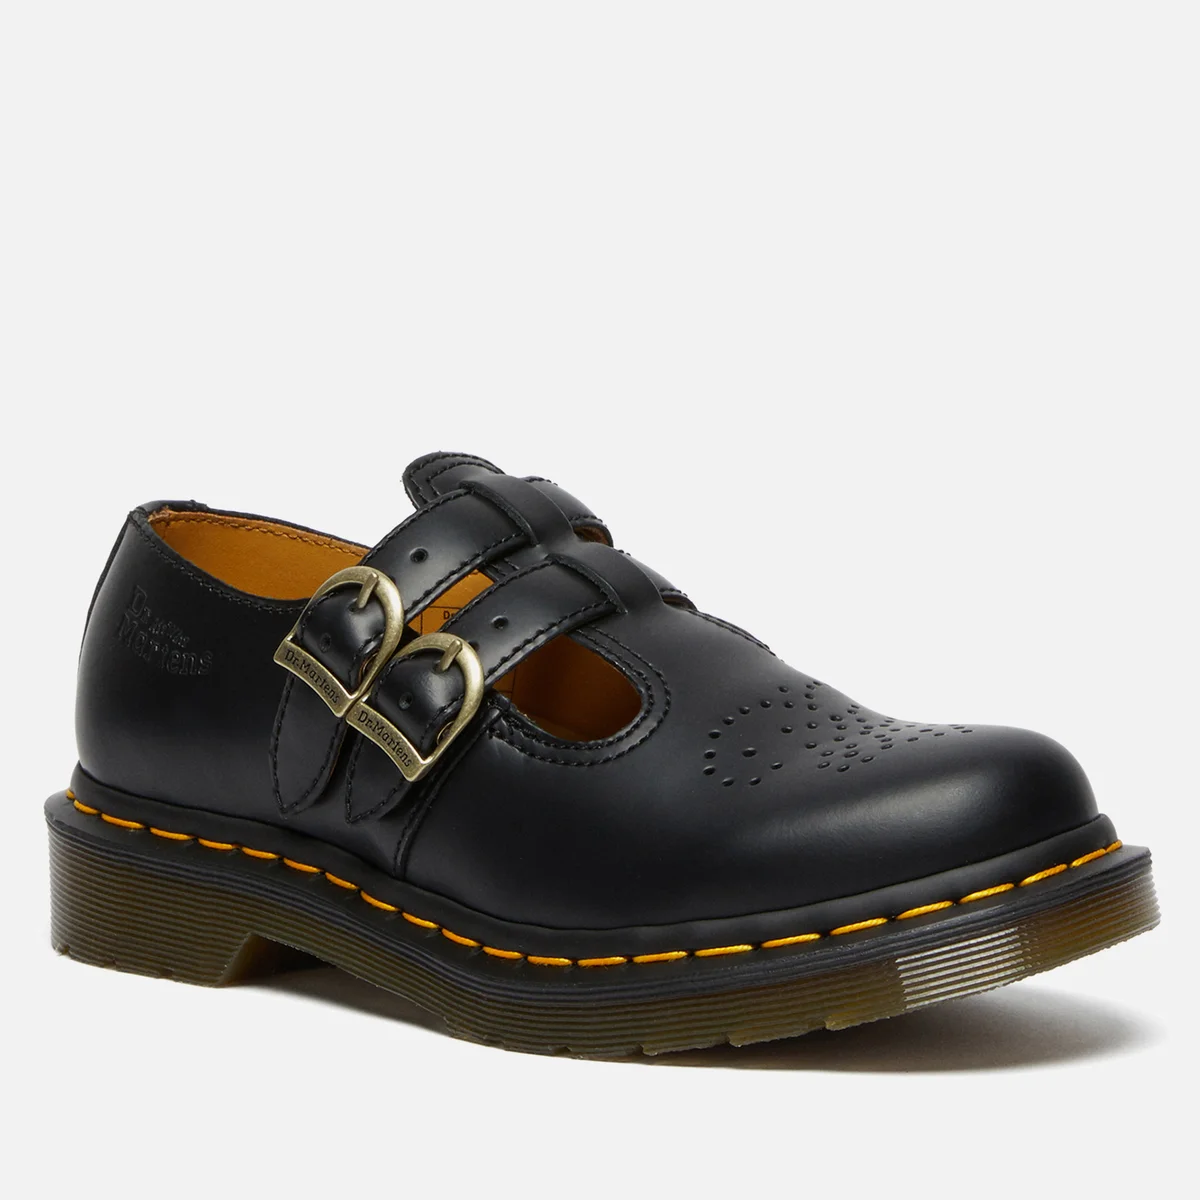 Dr. Martens Women's 8065 Leather Mary-Jane Shoes Image 1